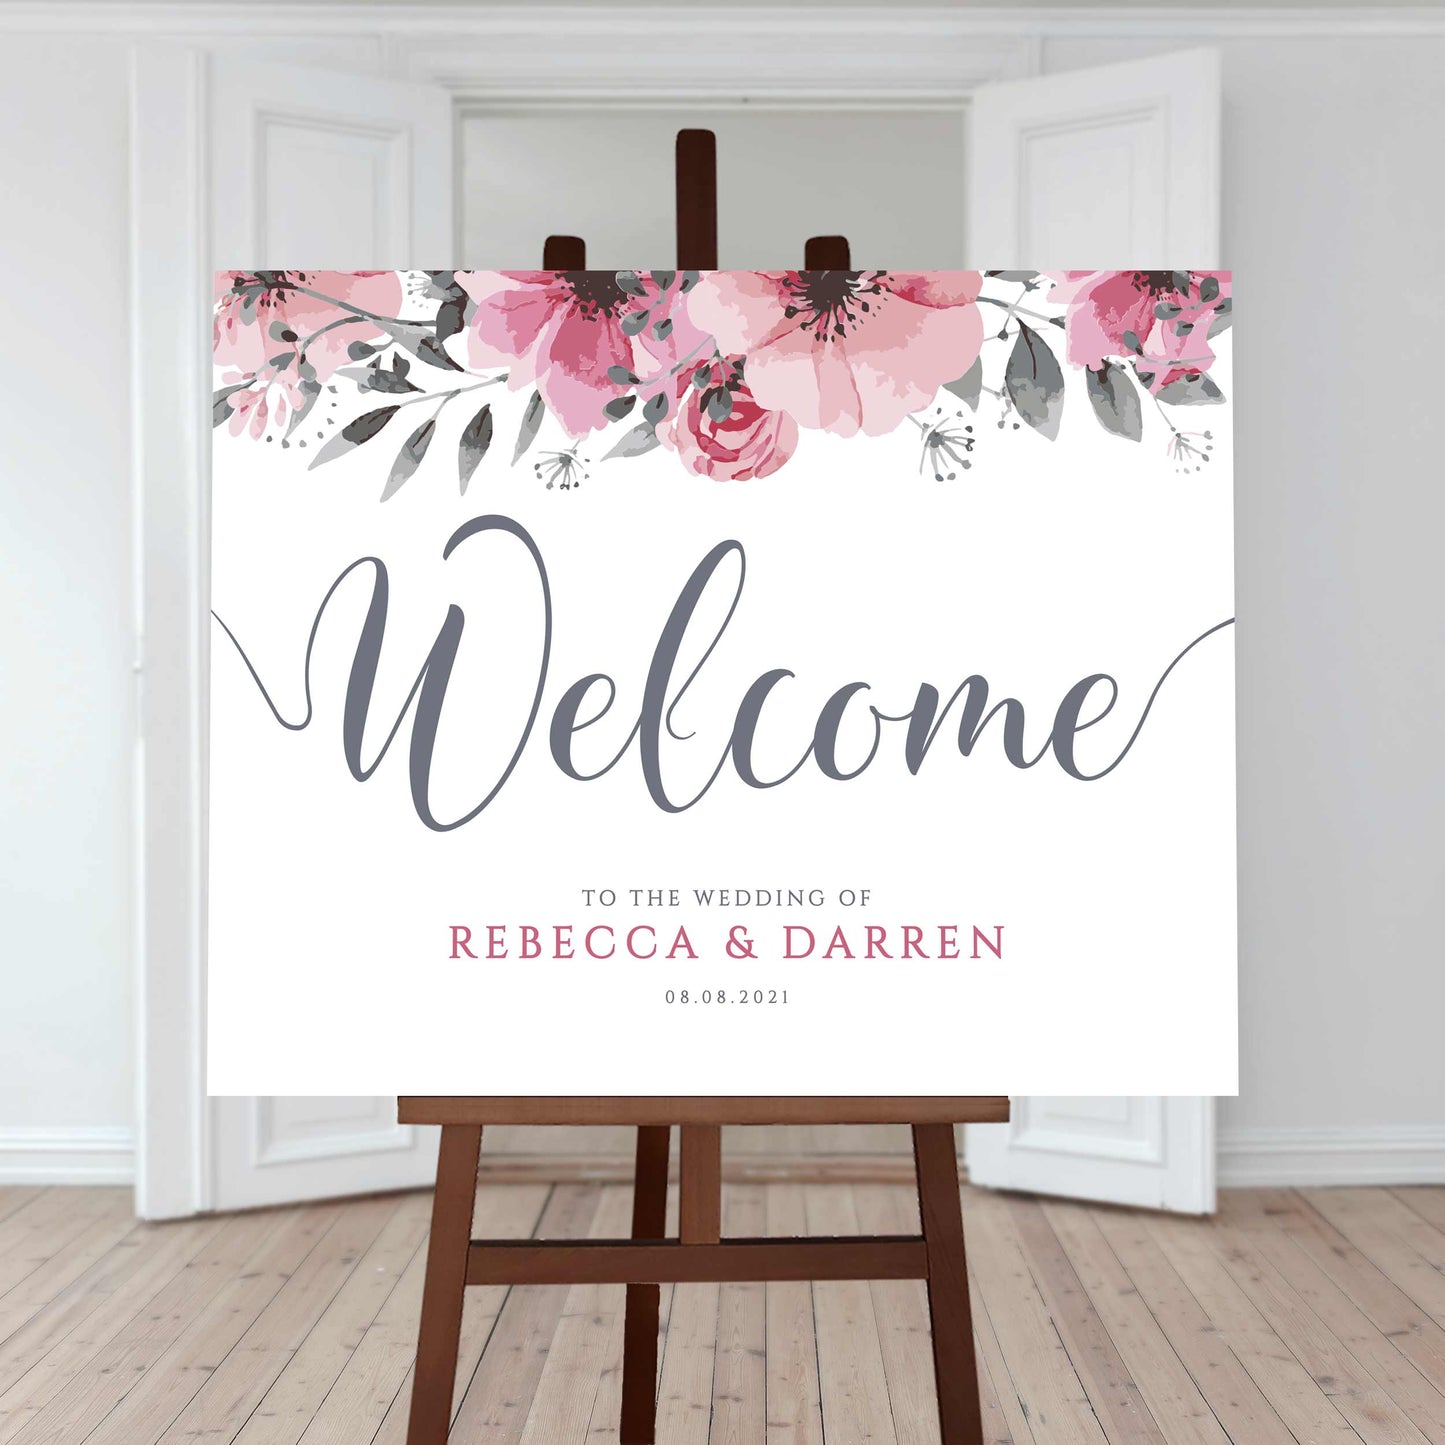 editable wedding welcome sign printed on a large board